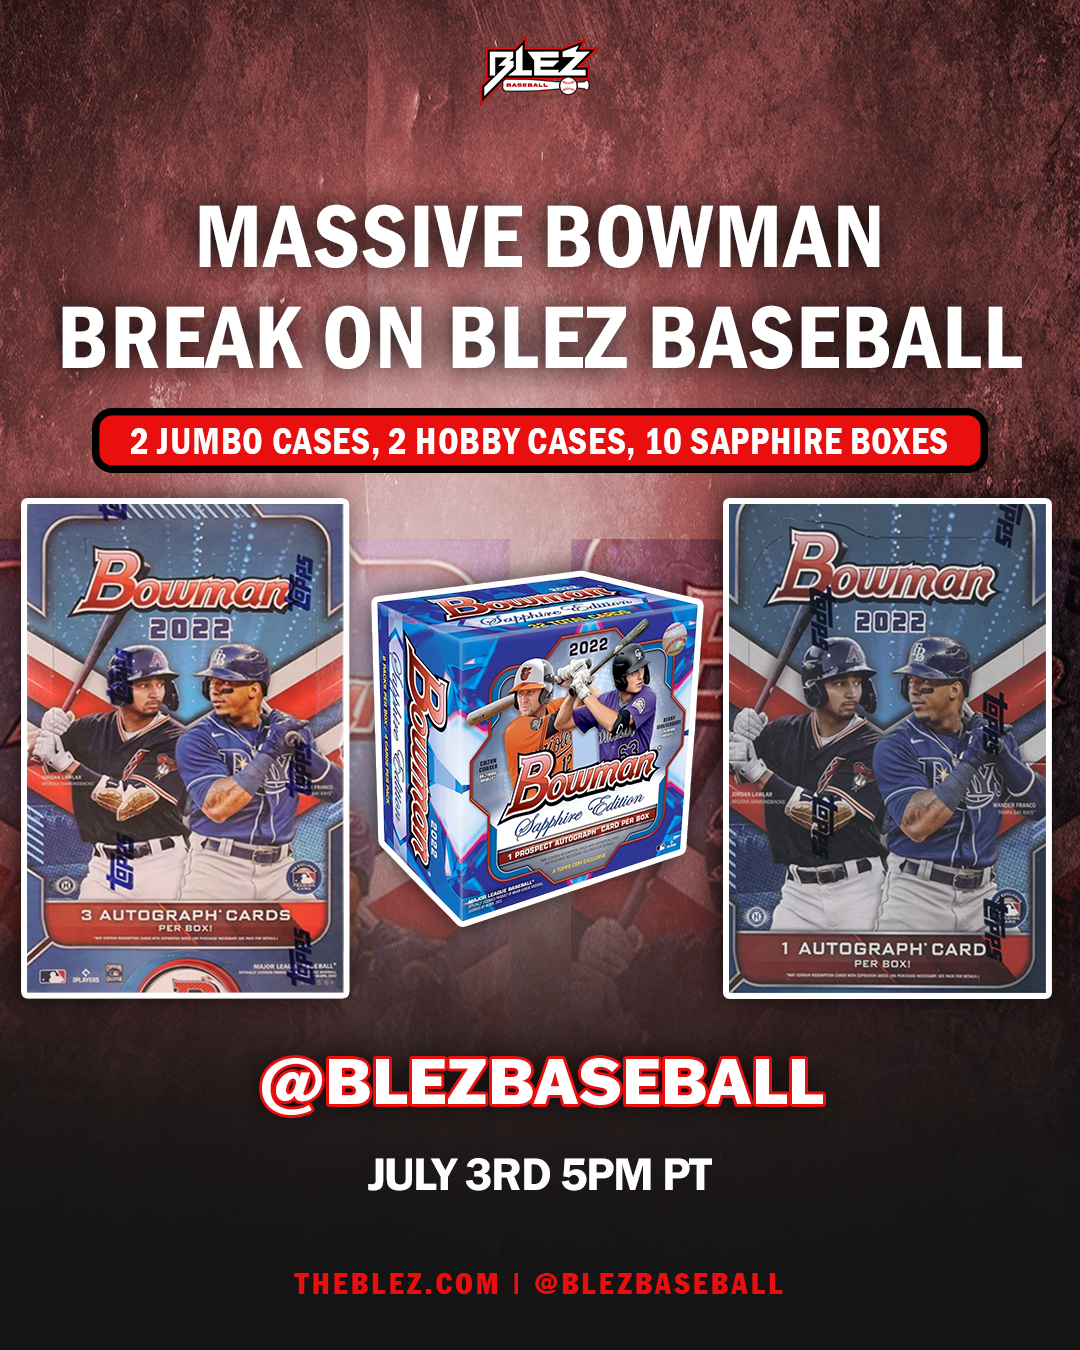 *********4 Case + 10 Box Sapphire 2022 Bowman Break!!!! 2 Cases Jumbo, 2 Case Hobby and 10 boxes of 2022 Bowman Sapphire Pick Your Team #1